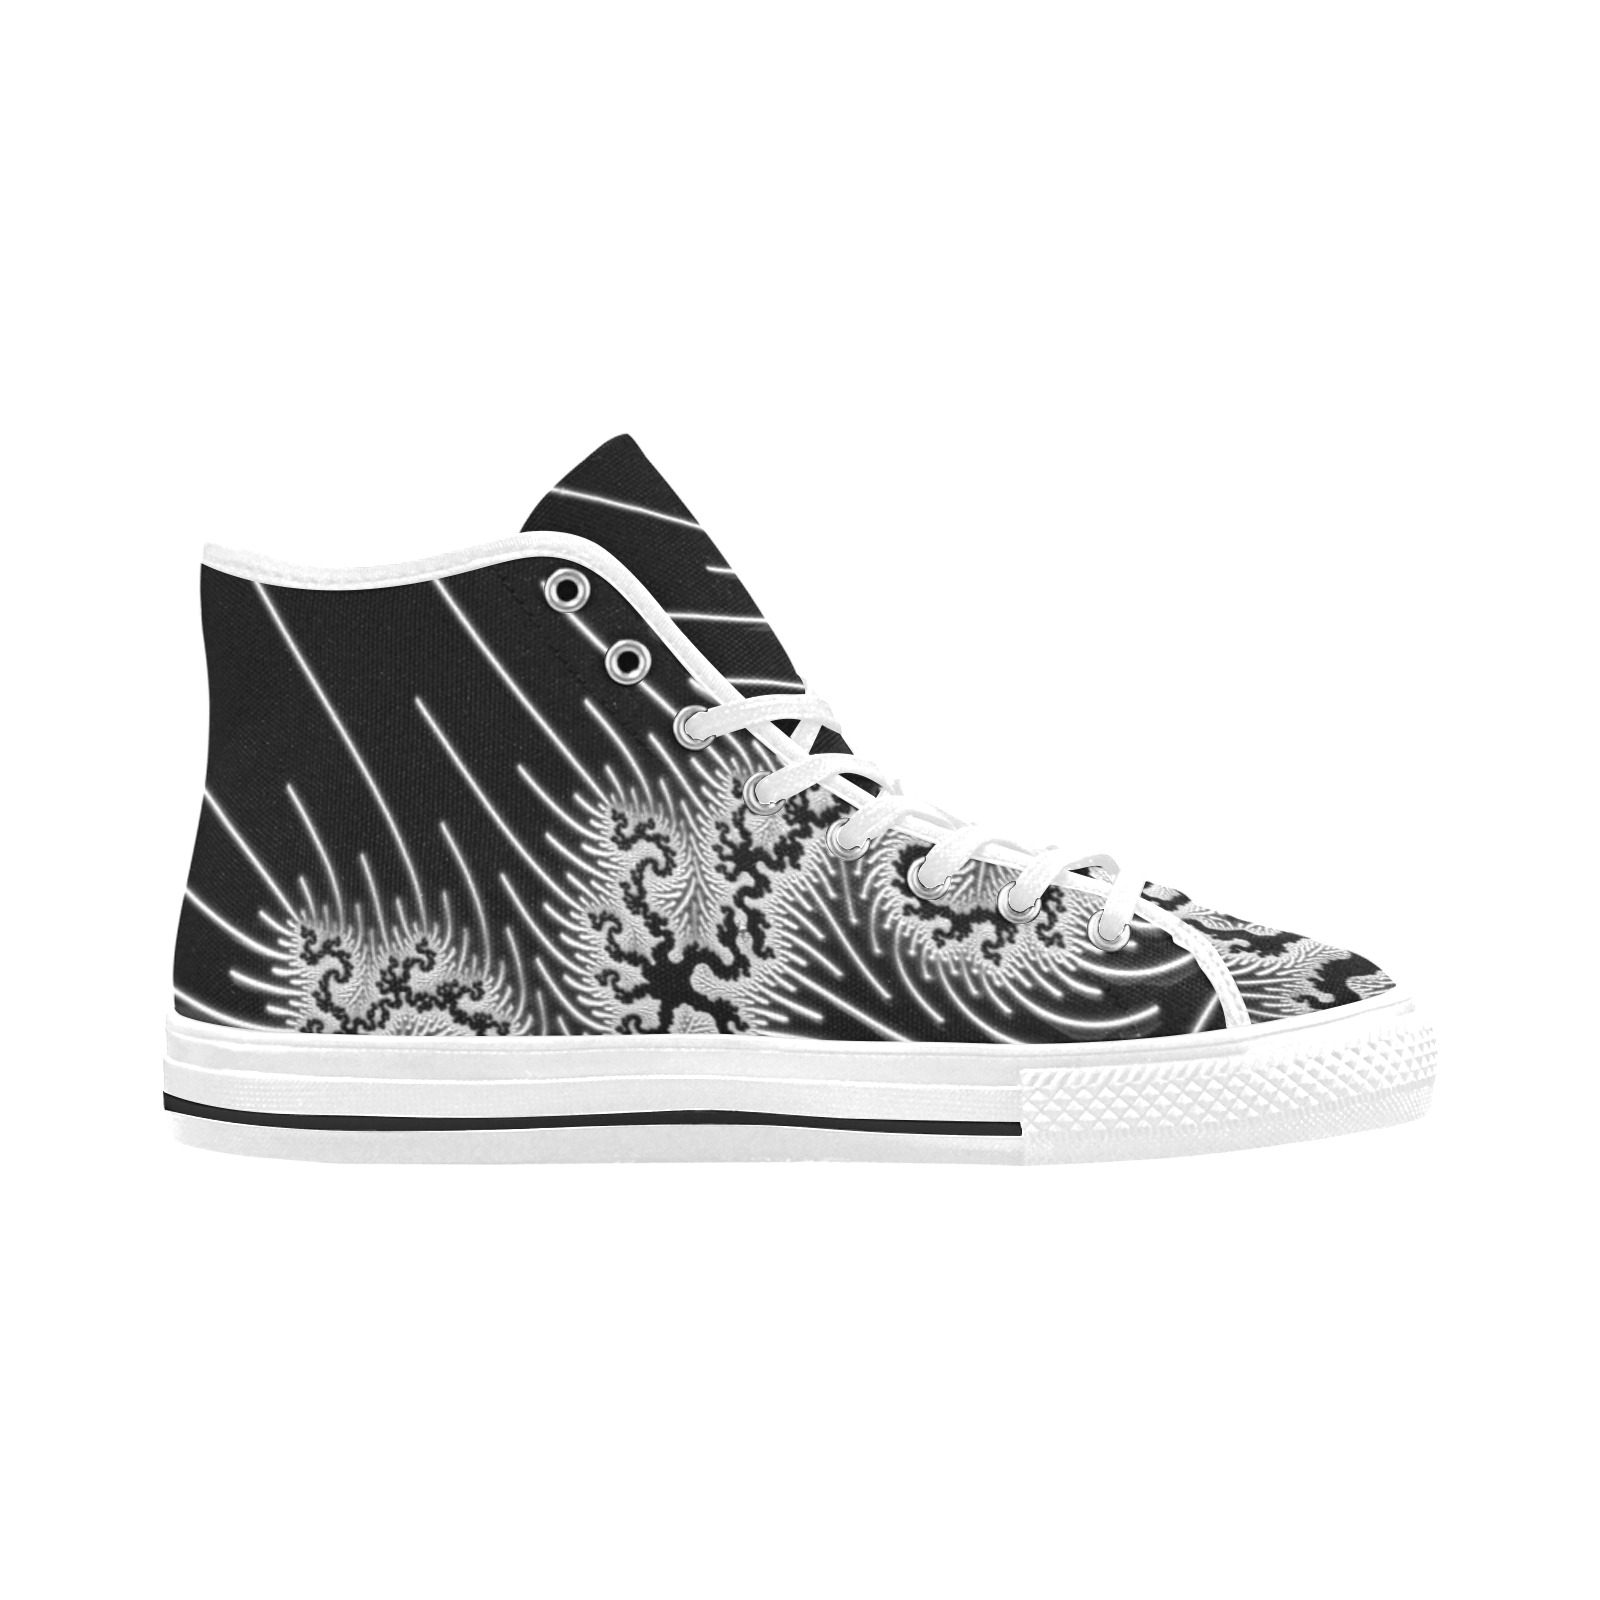 White and Silver Lace on Black Fractal Abstract Vancouver H Women's Canvas Shoes (1013-1)